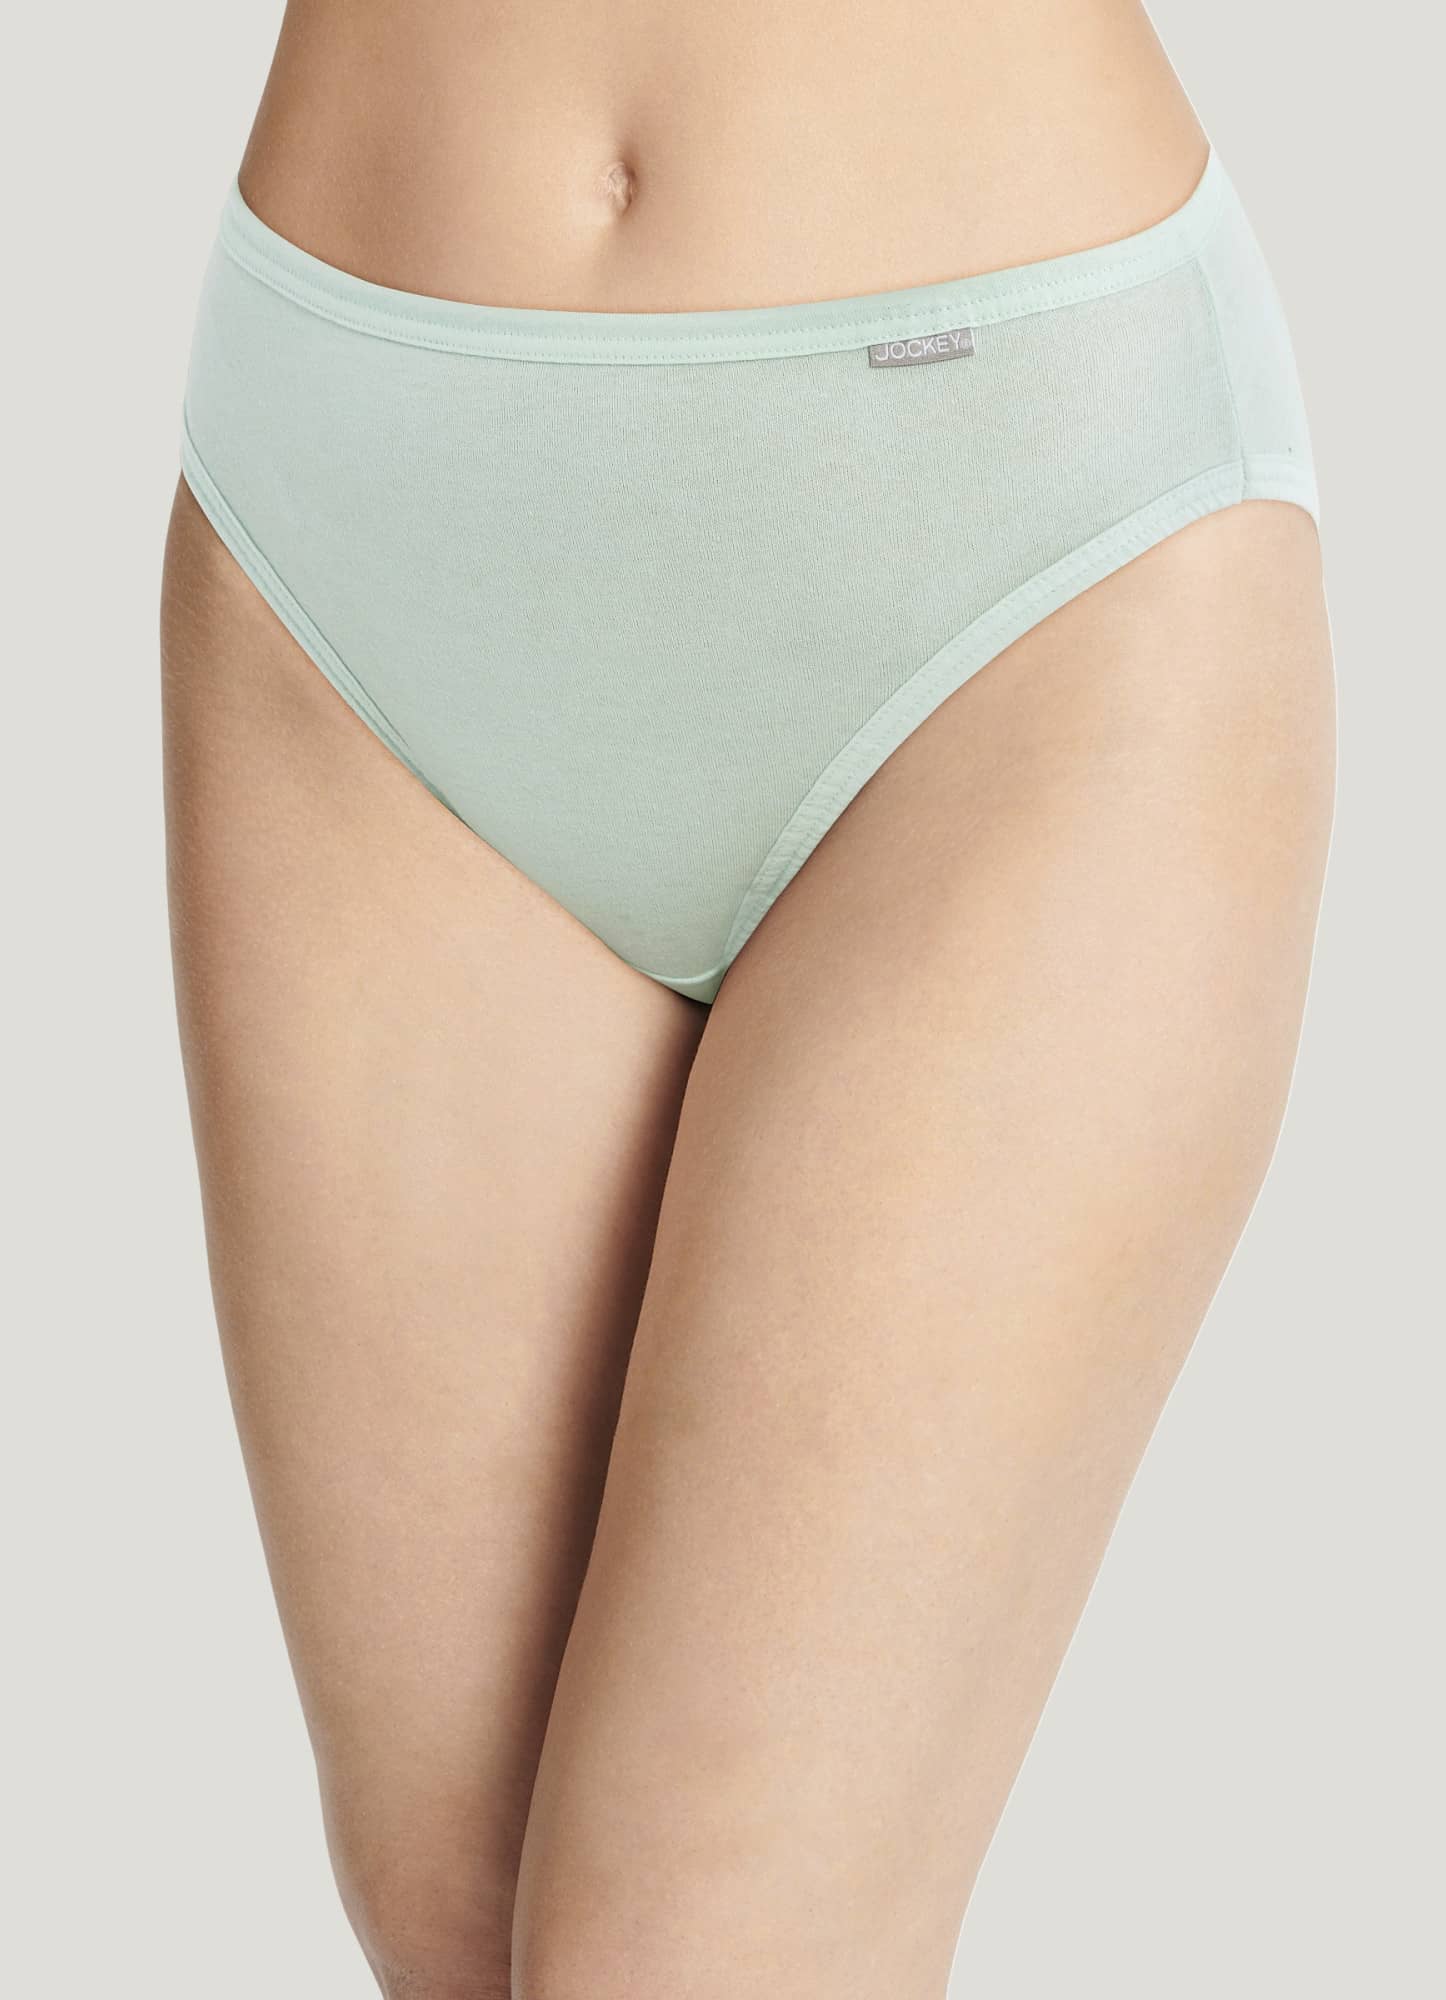 5-pack French Cut Panties (3139407)